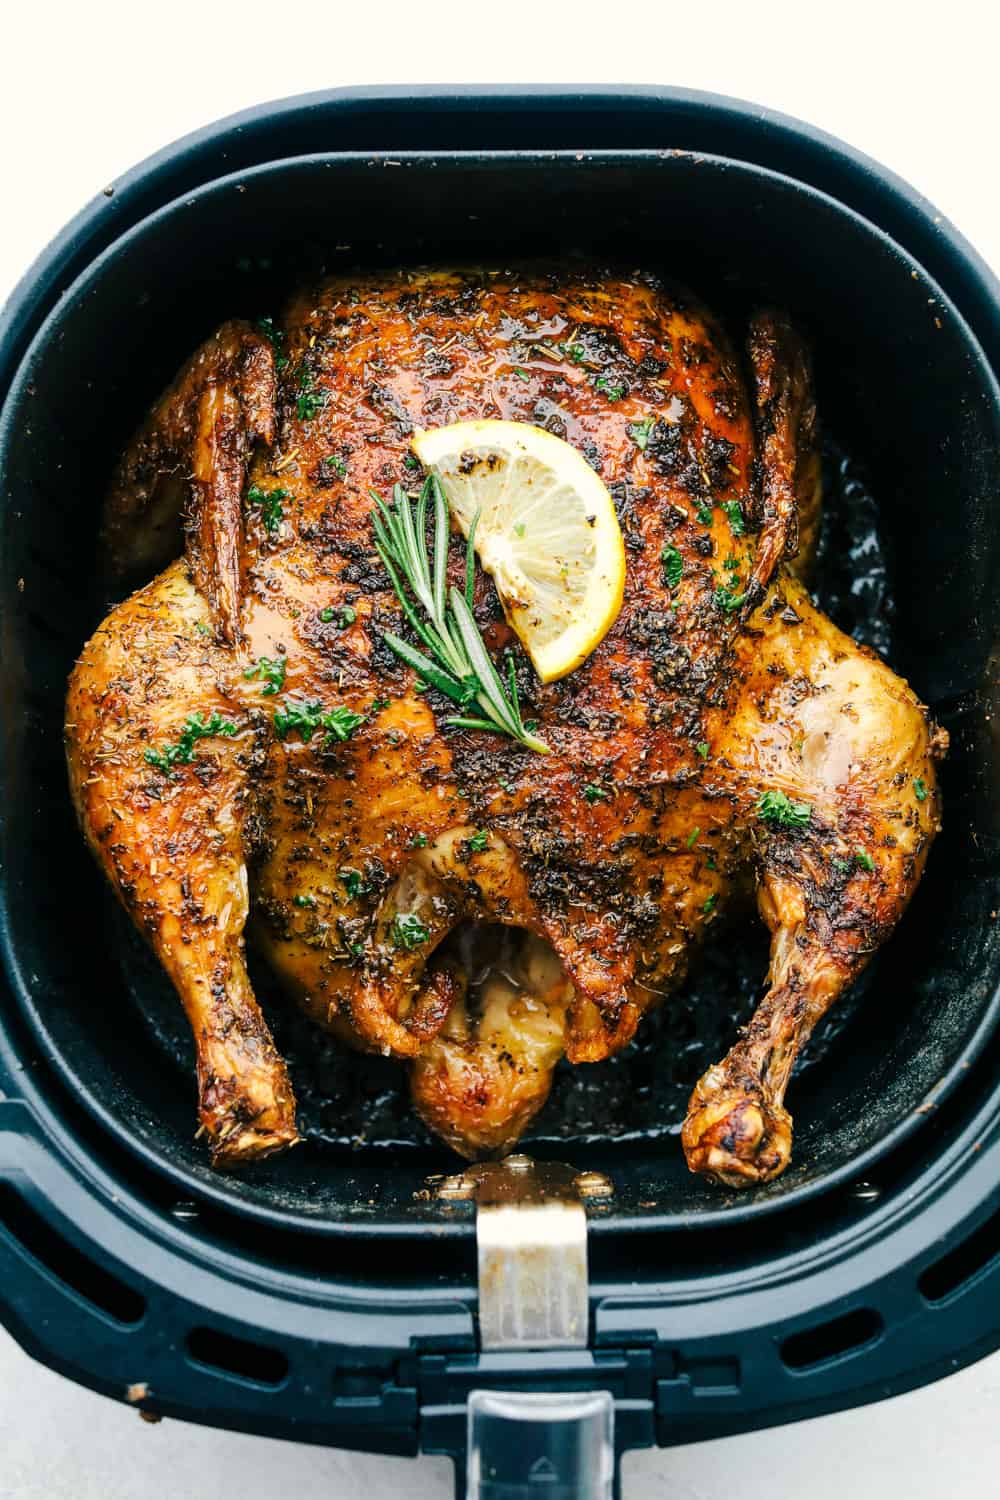 https://storables.com/wp-content/uploads/2023/07/how-to-cook-rotisserie-chicken-in-air-fryer-1689668873.jpg